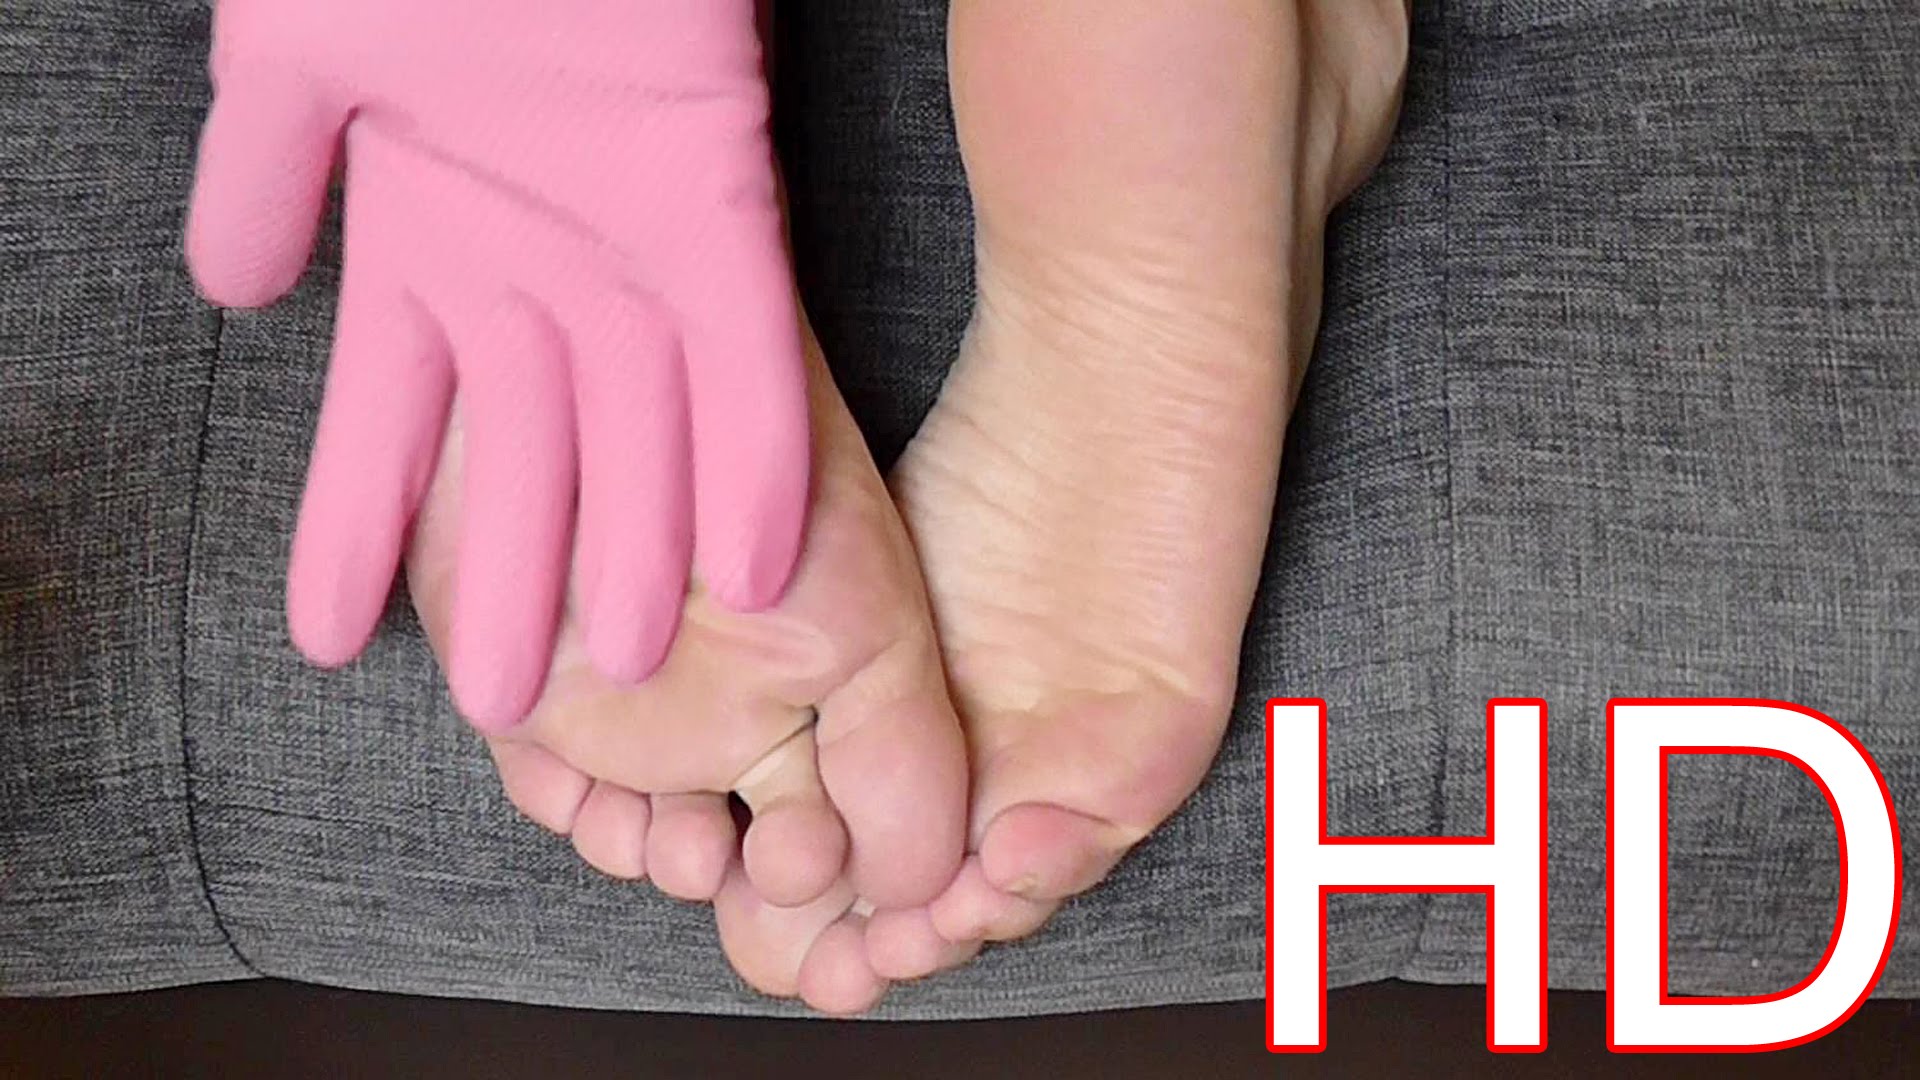 Relaxing Gentle Foot Massage Woman Bare Feet Barefoot Tapping Sounds